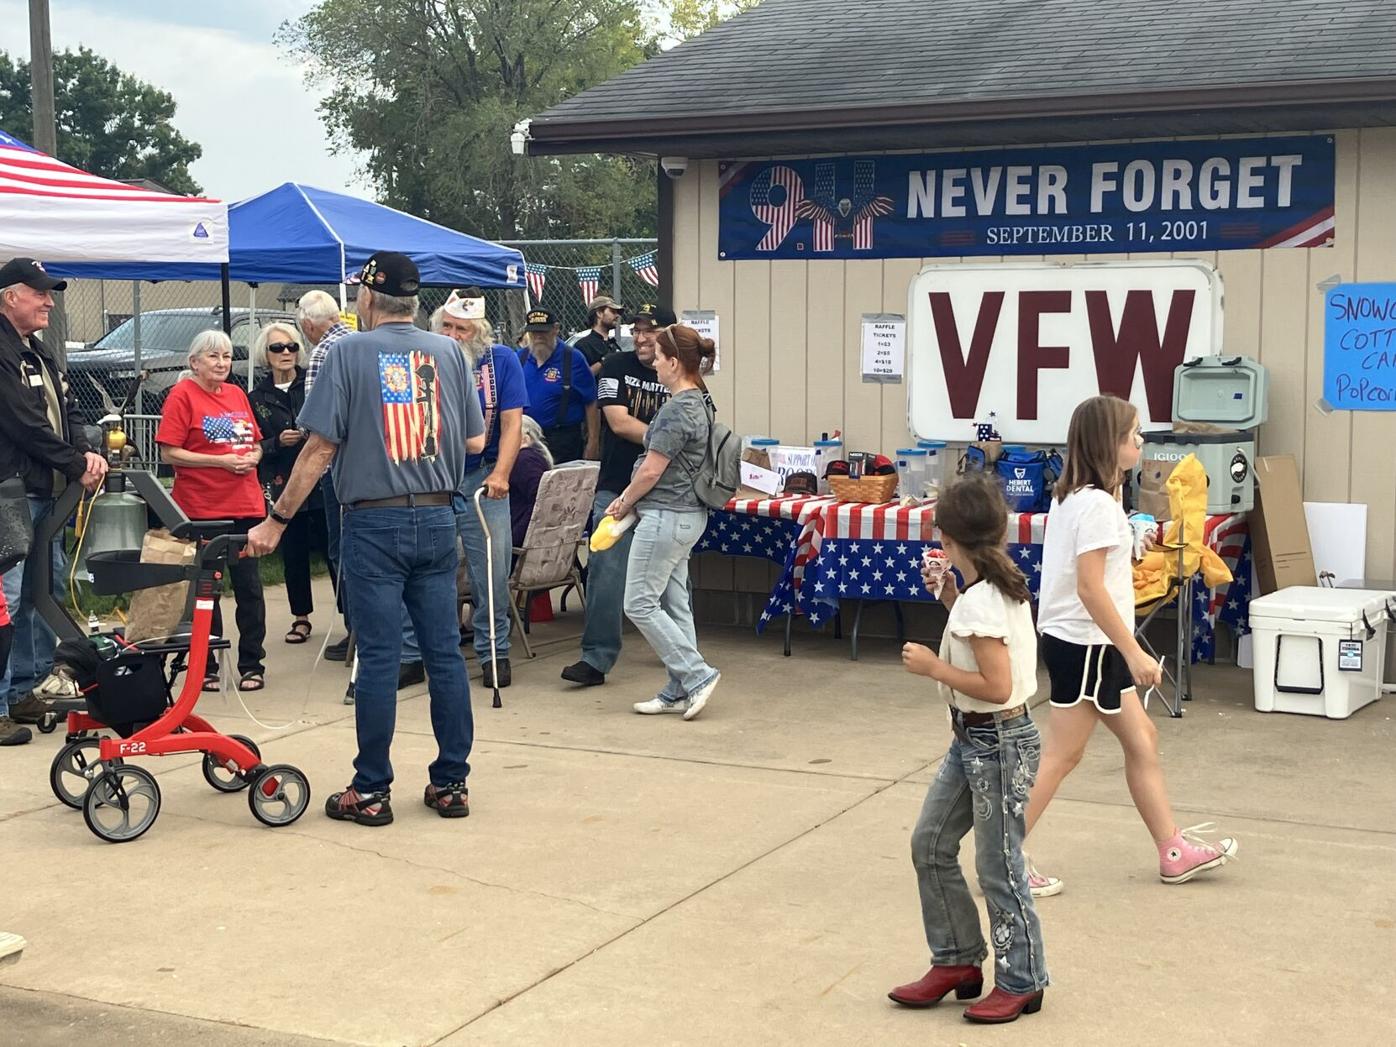 Veterans of Foreign Wars VFW - The VFW asks all to pause and